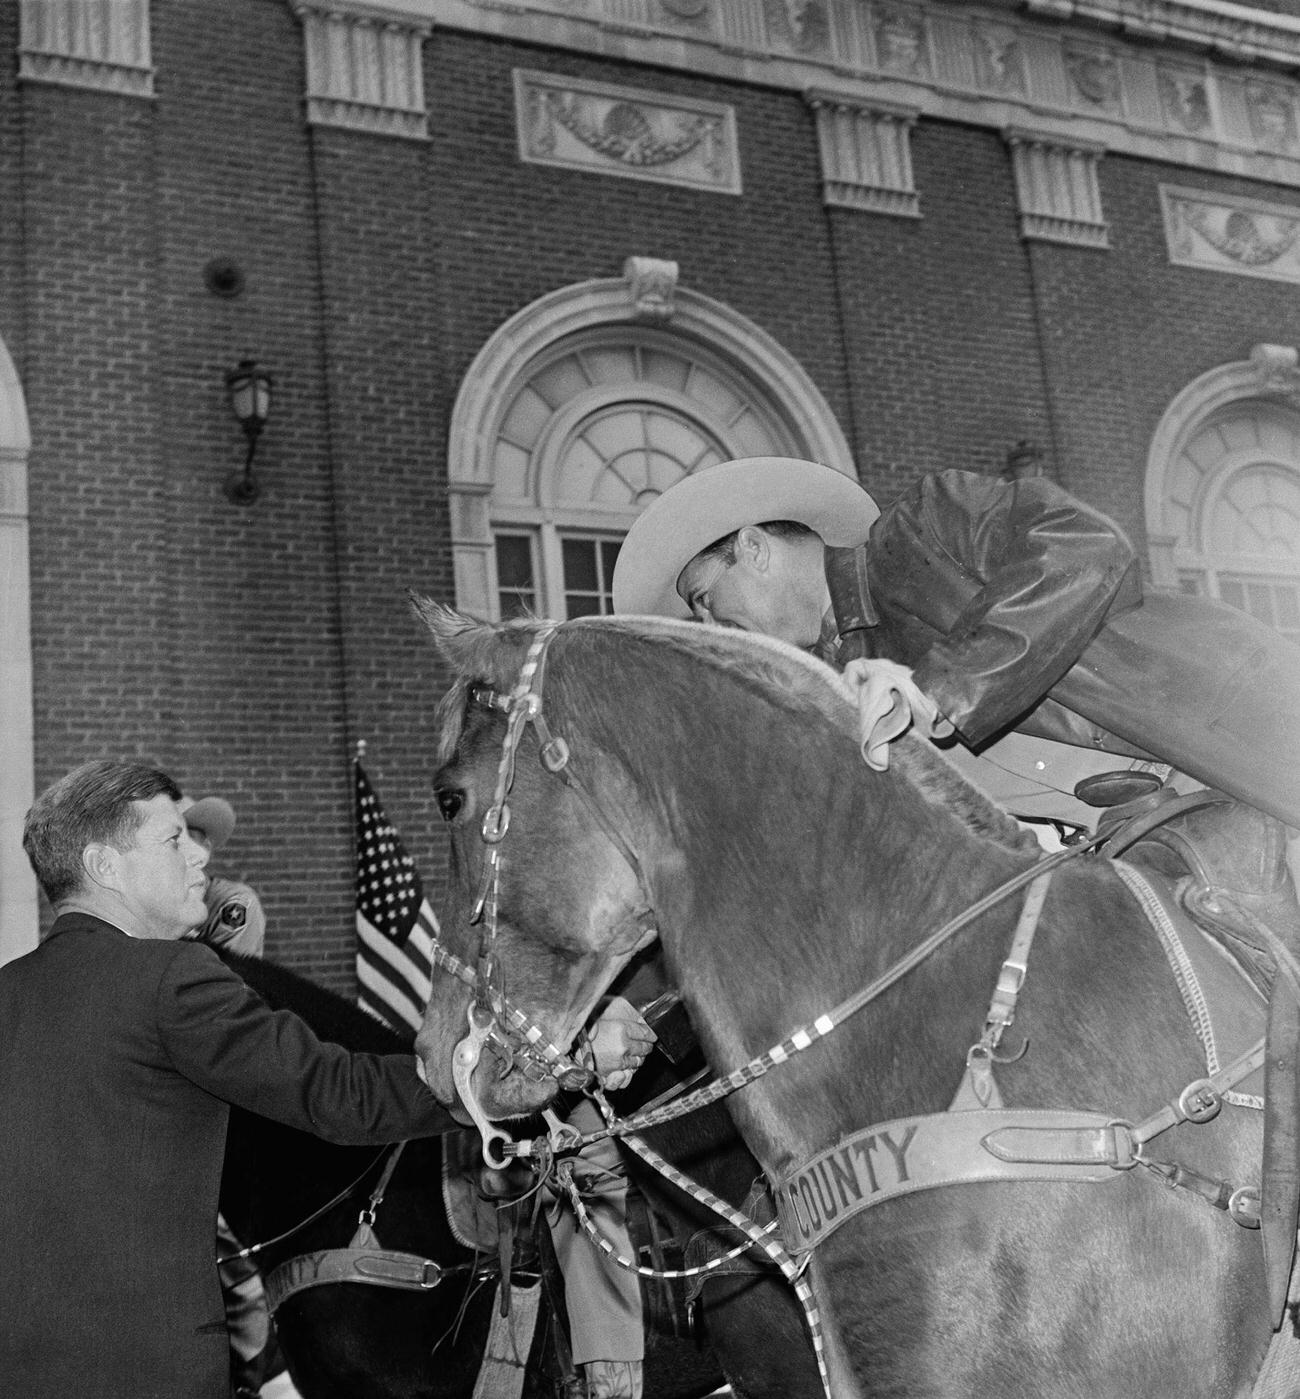 John F. Kennedy shakes hands with a mounted Tarrant County Sheriff's posse member after an outdoor speech, hours before his assassination in Dallas, 1963.